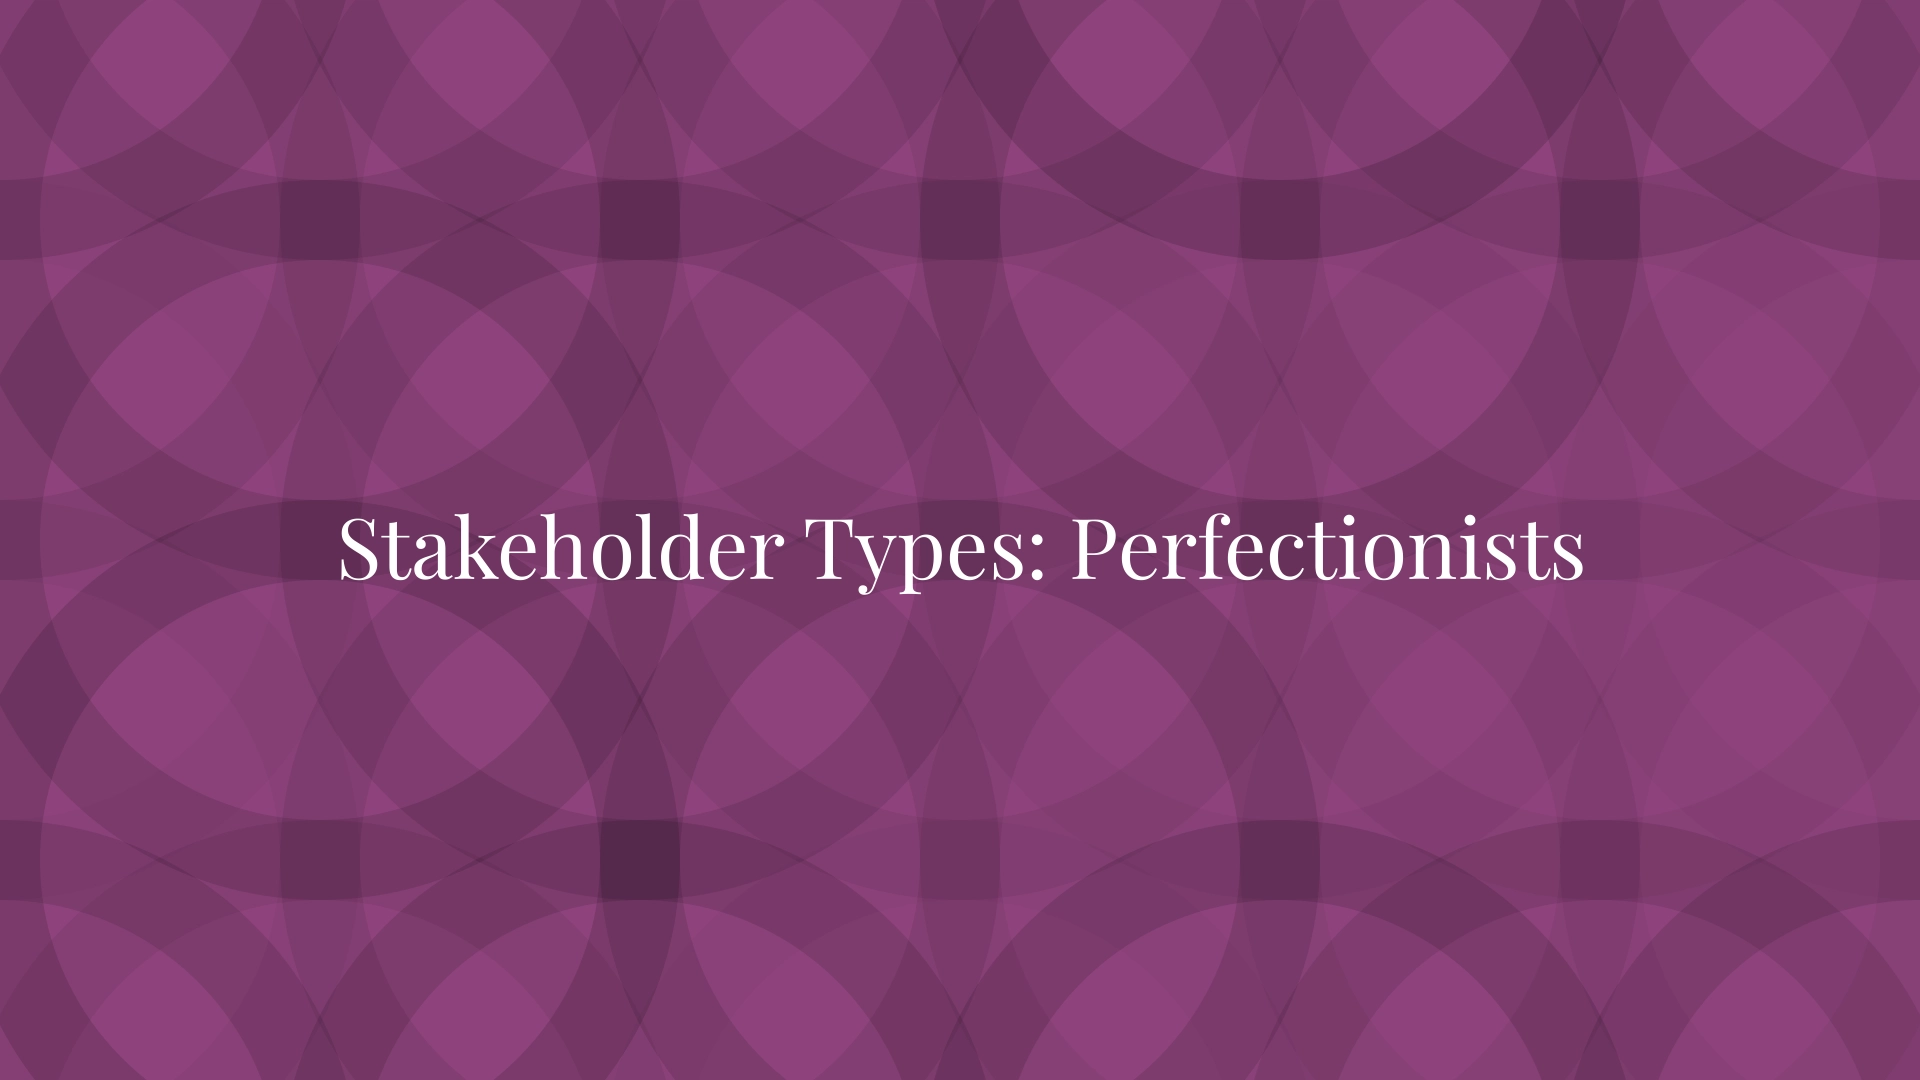 Stakeholder Types: Perfectionists